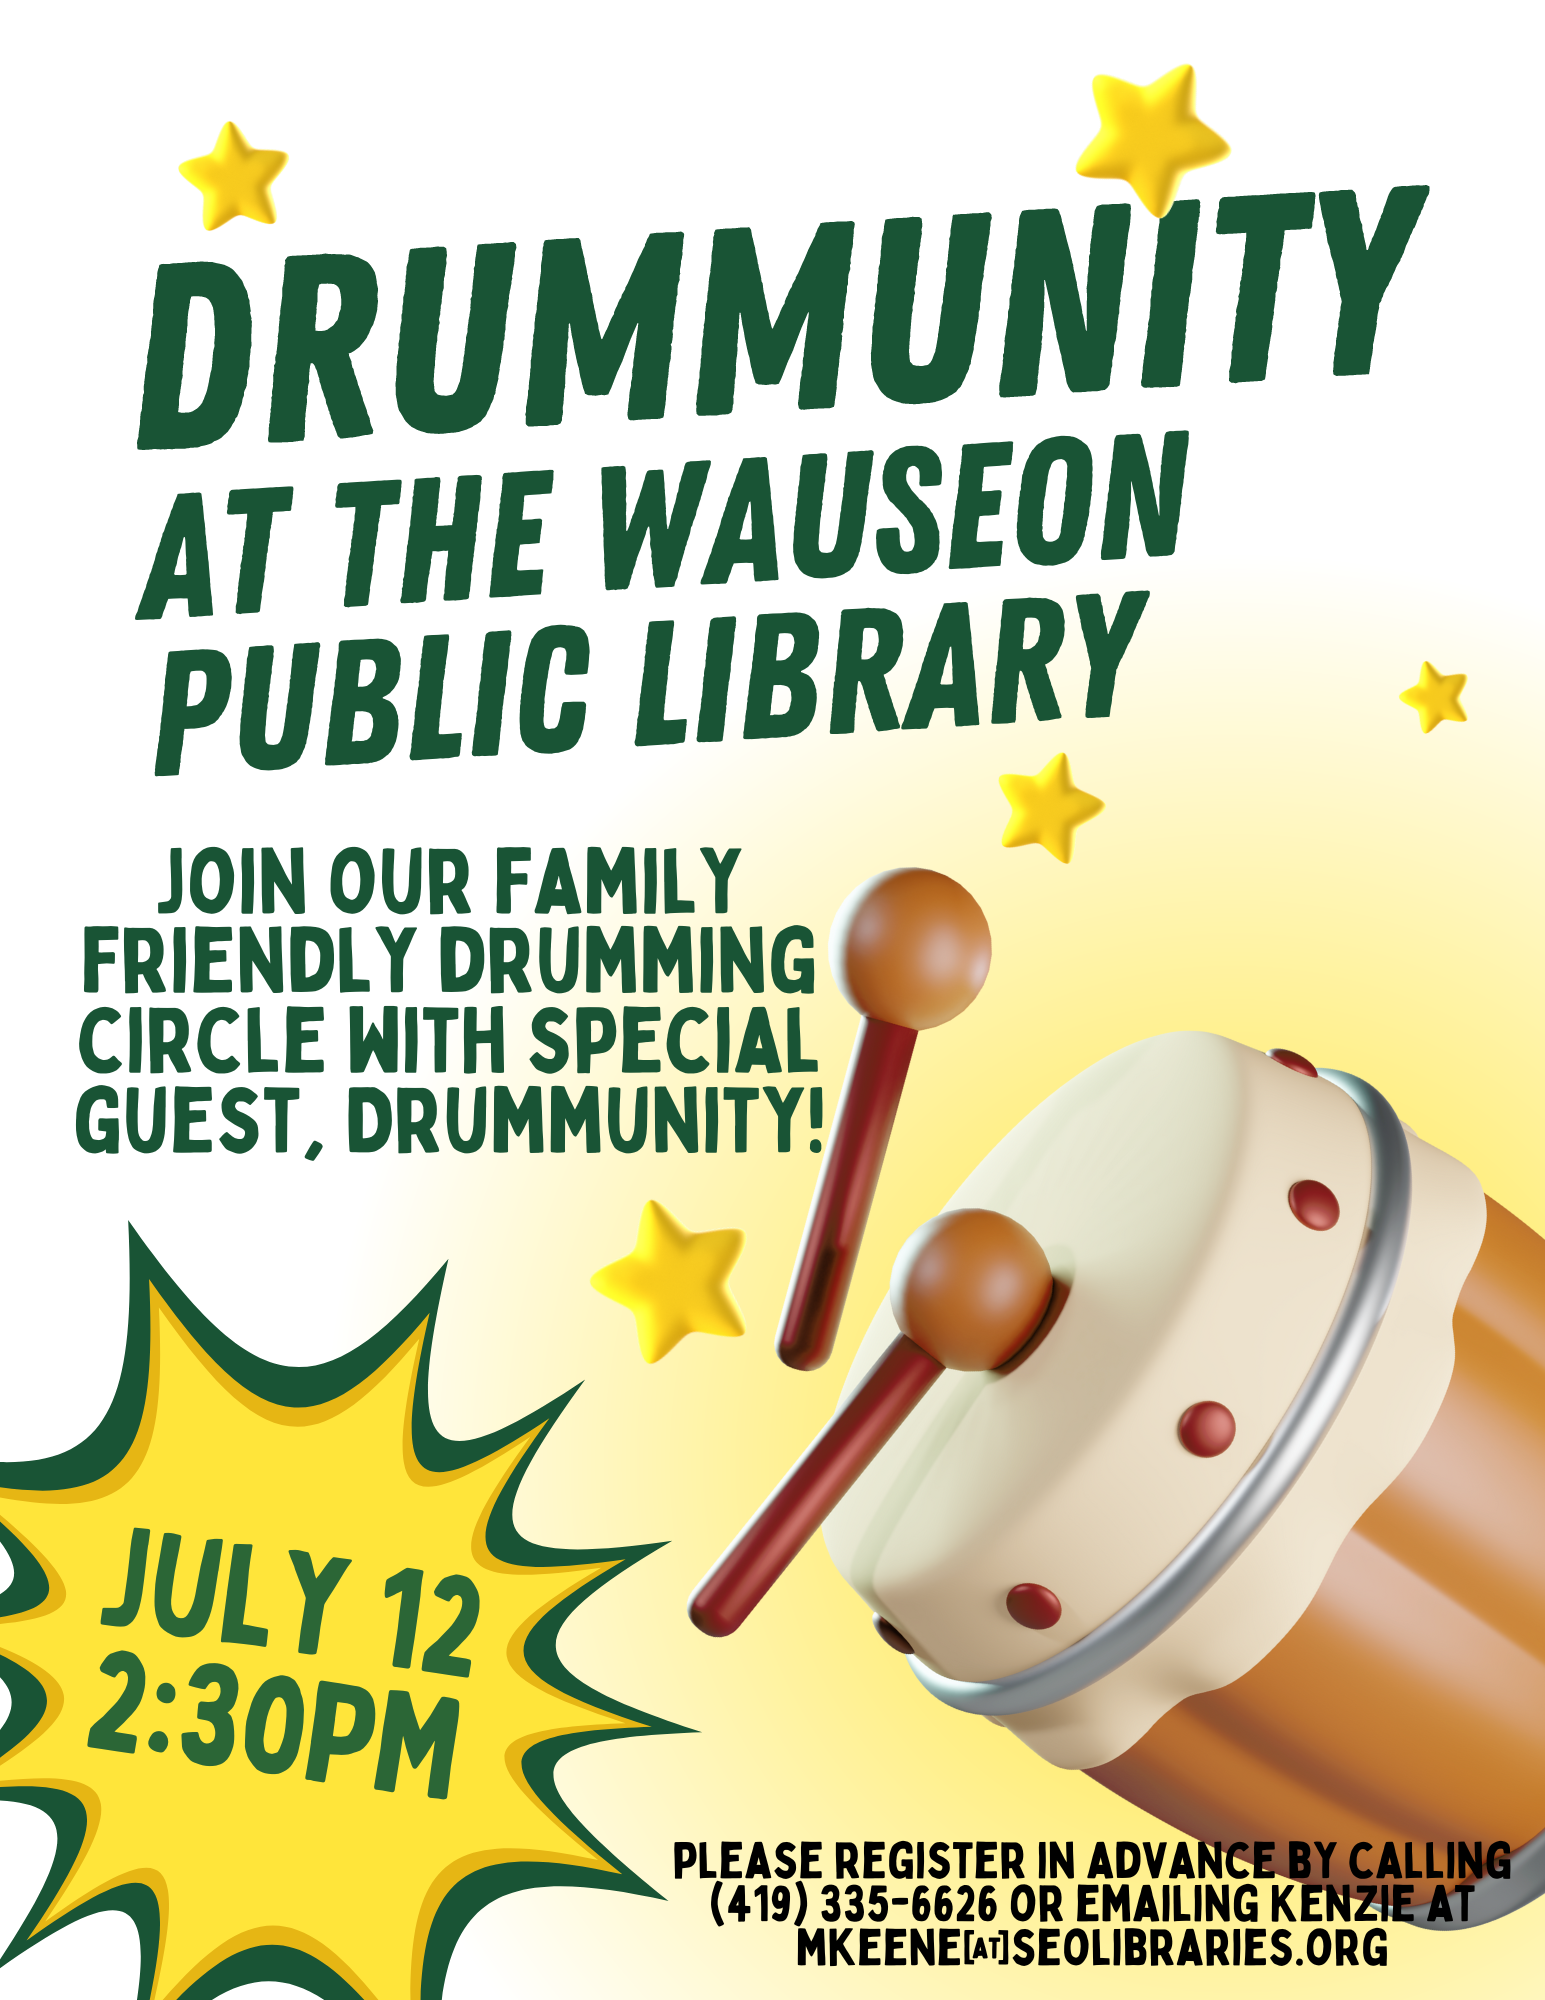 Drummunity at the Wauseon Public Library flyer